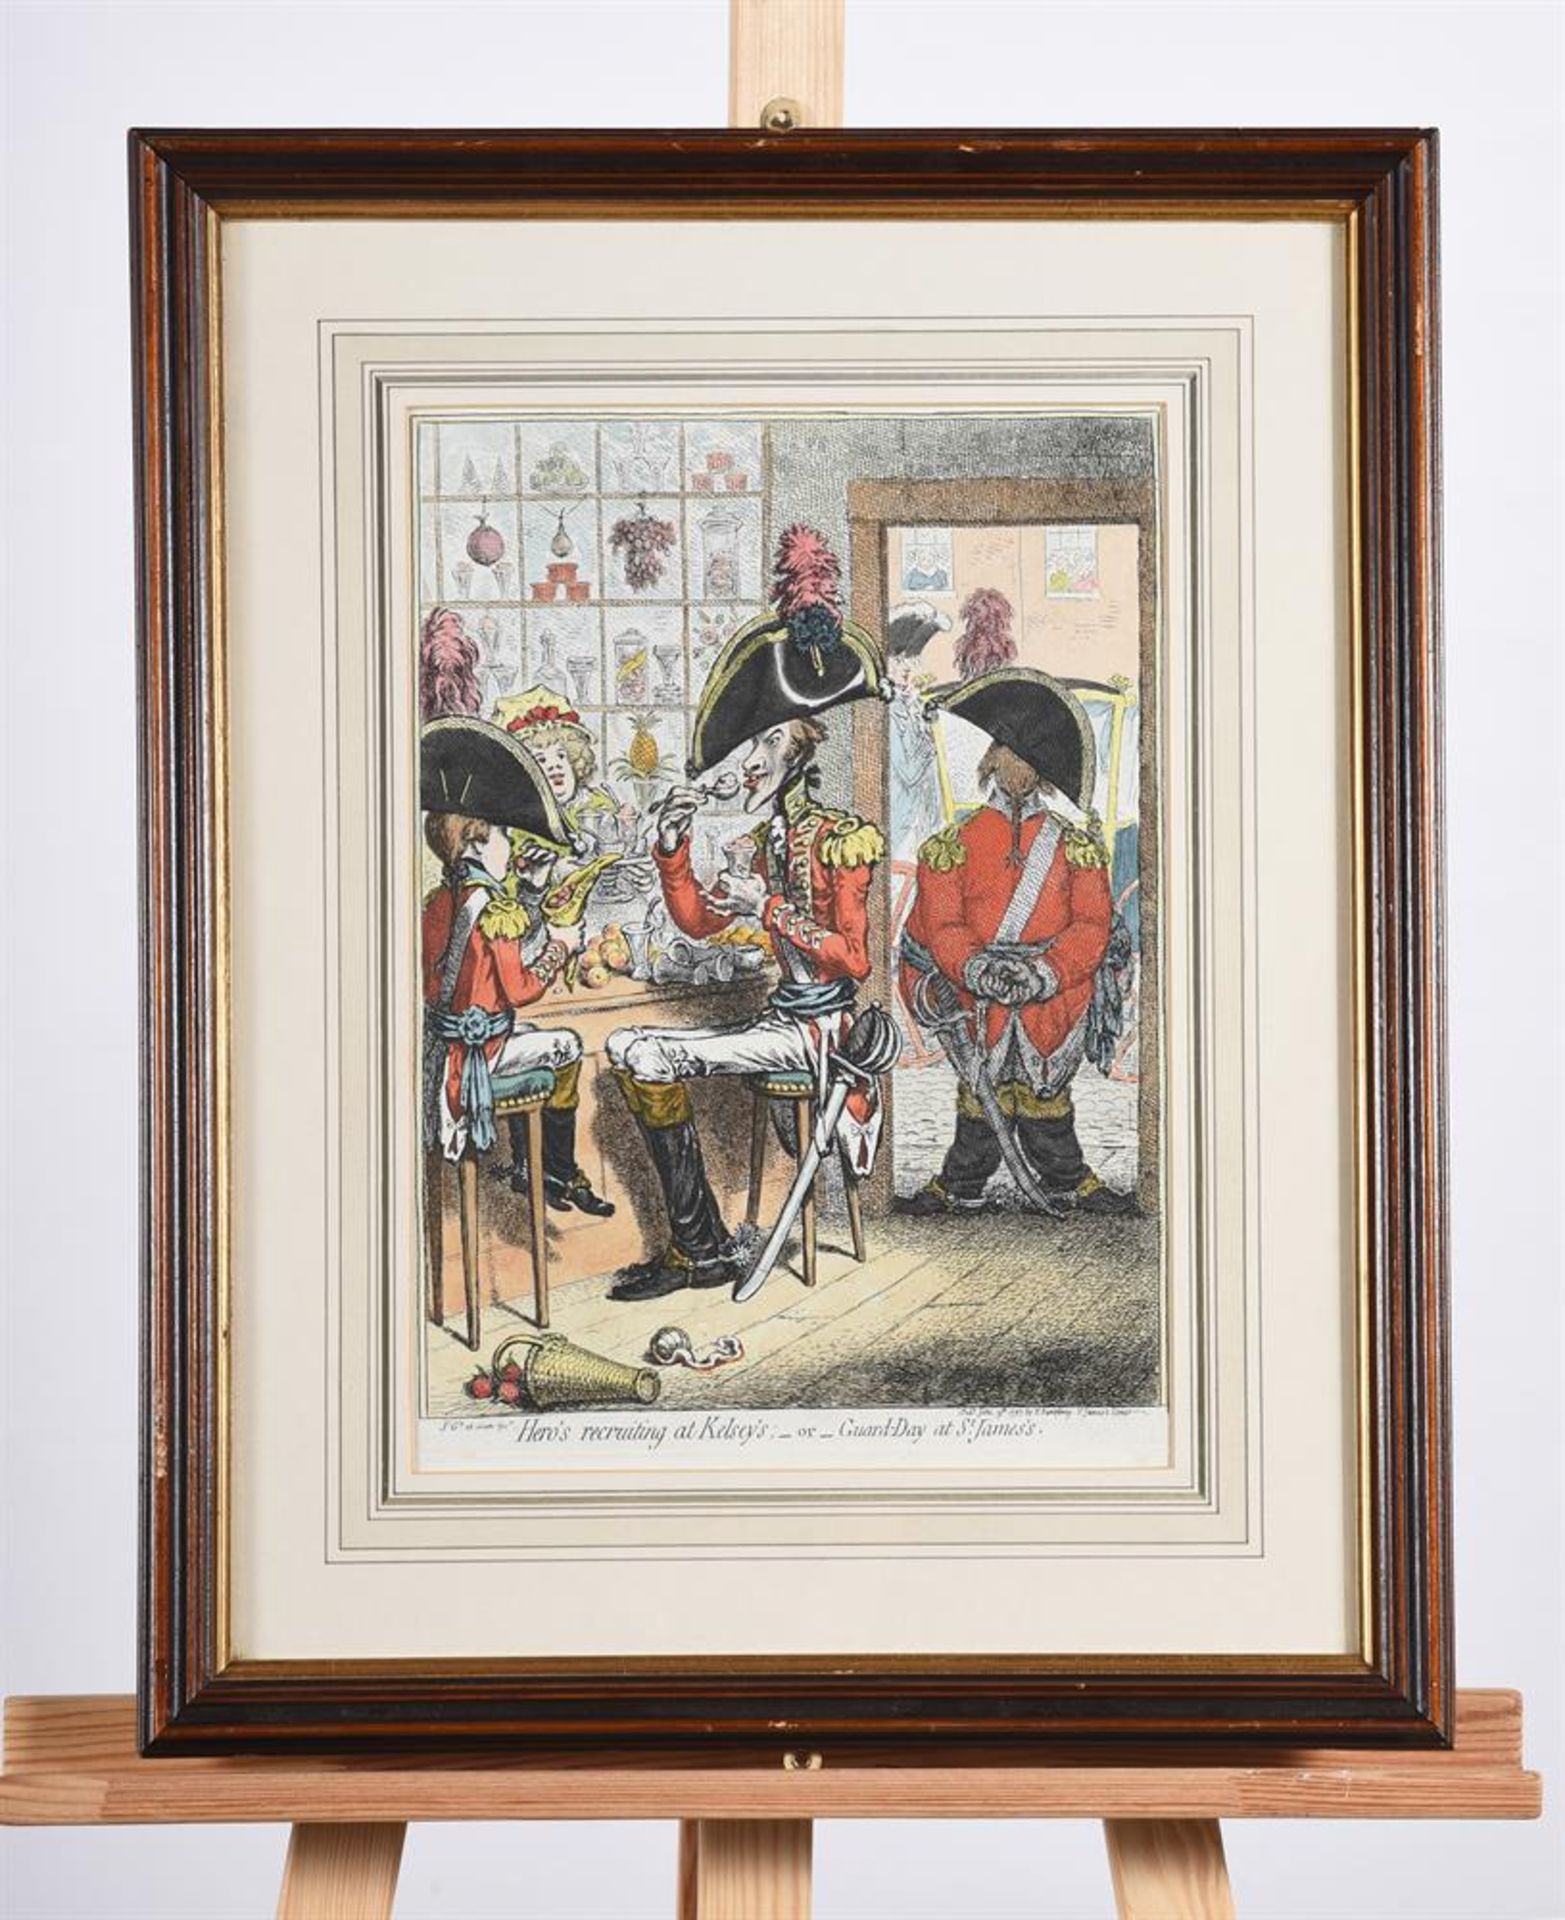 After James Gillray, Hero's Recruiting at Kelsey's or Guard-day at St. James's - Image 5 of 8